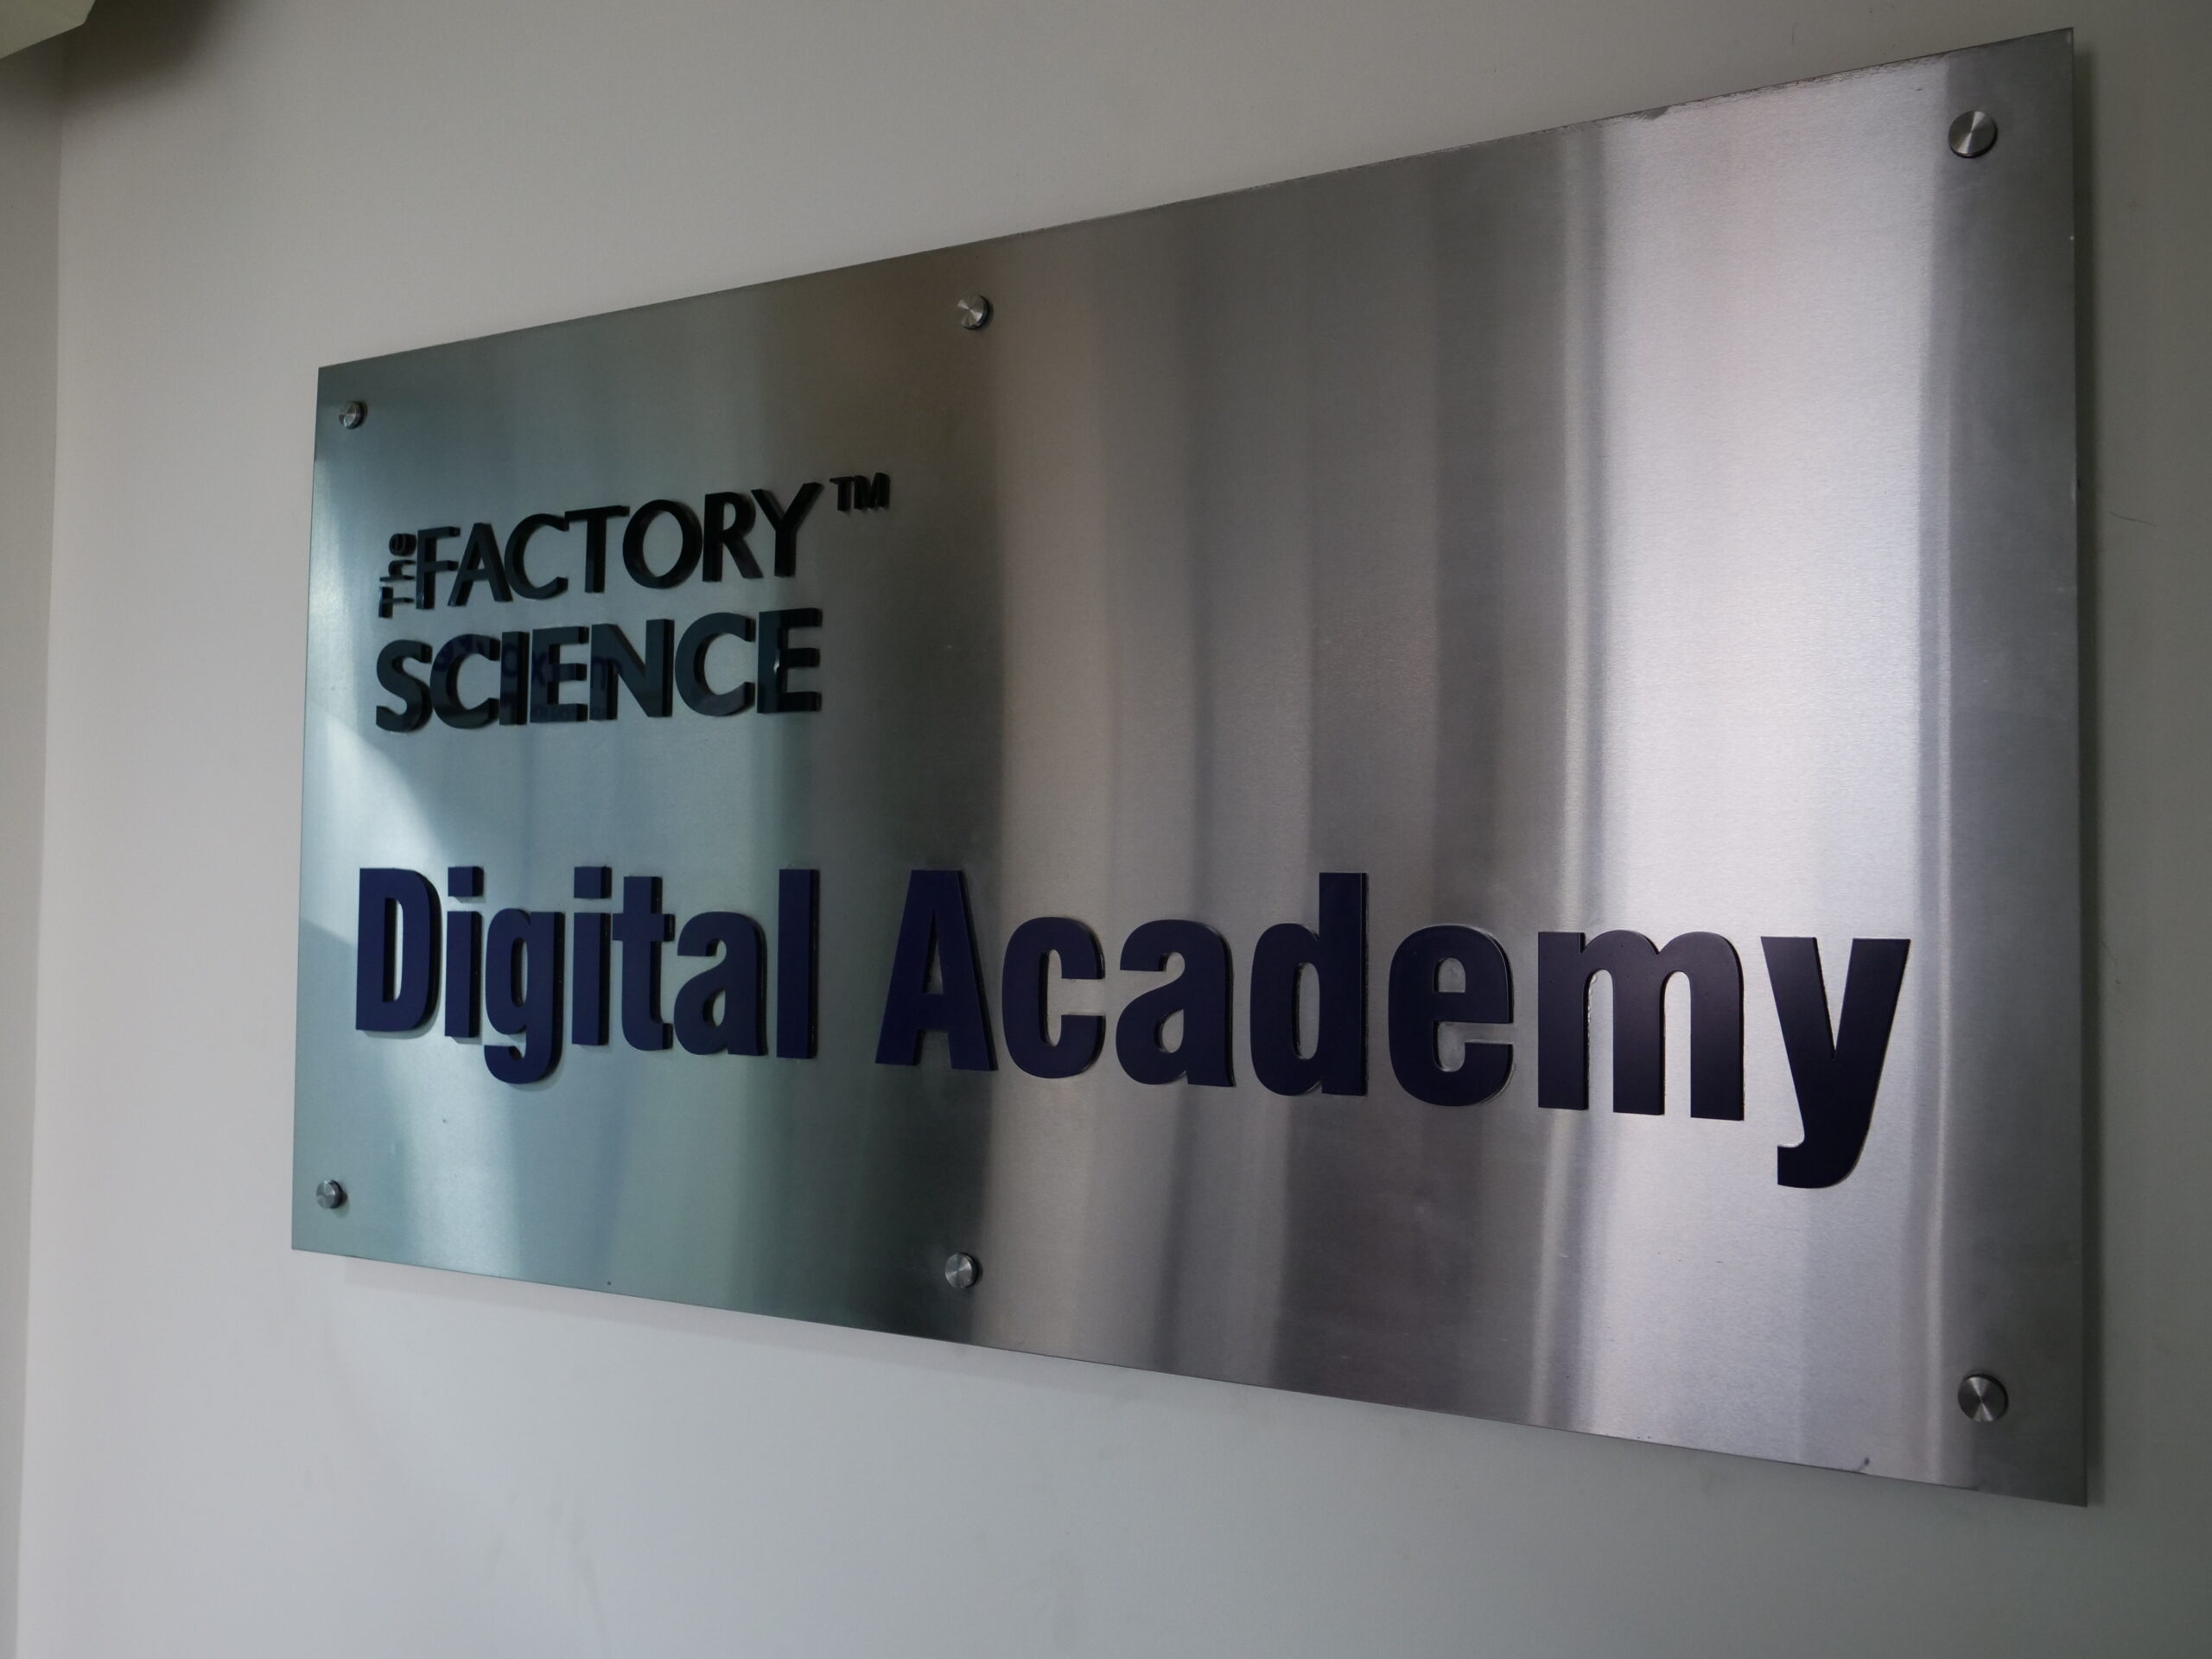 the factory science digital academy- the state of the art training facility for industry 4.0 – inspiring industry x.0